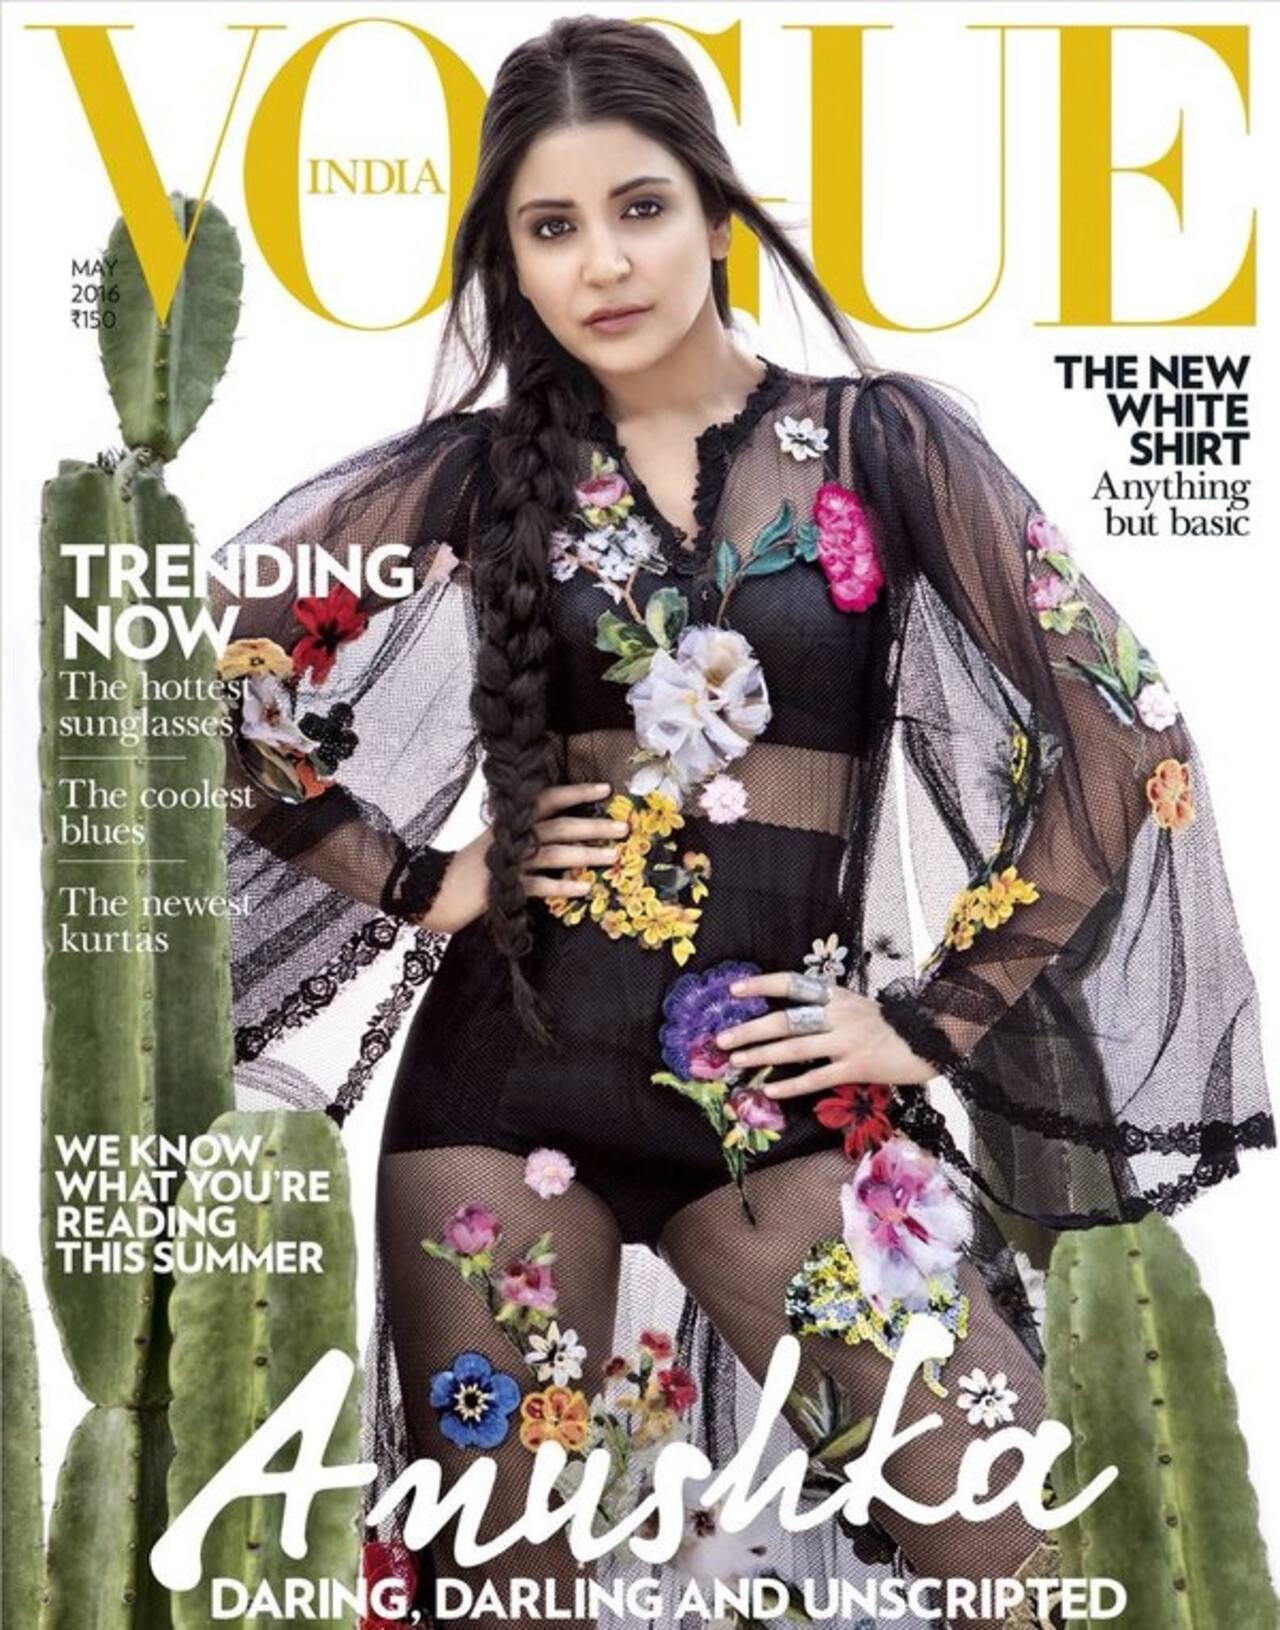 Anushka Sharma on a latest mag cover is SEXY, SULTRY and SCINTILLATING!